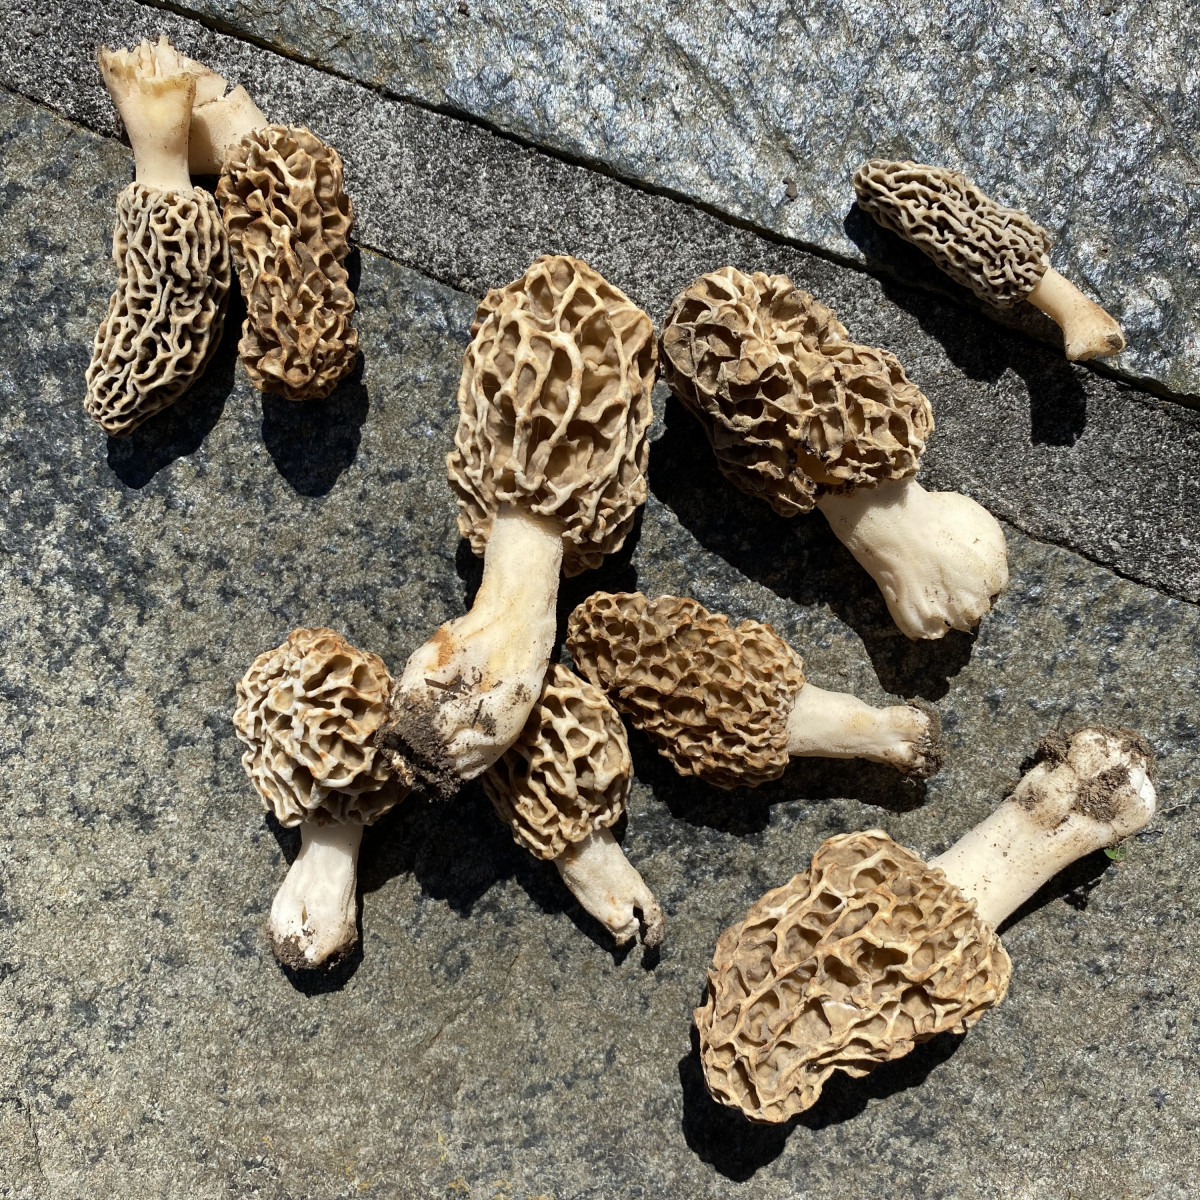 Morel mushrooms laid out to dry on concrete.